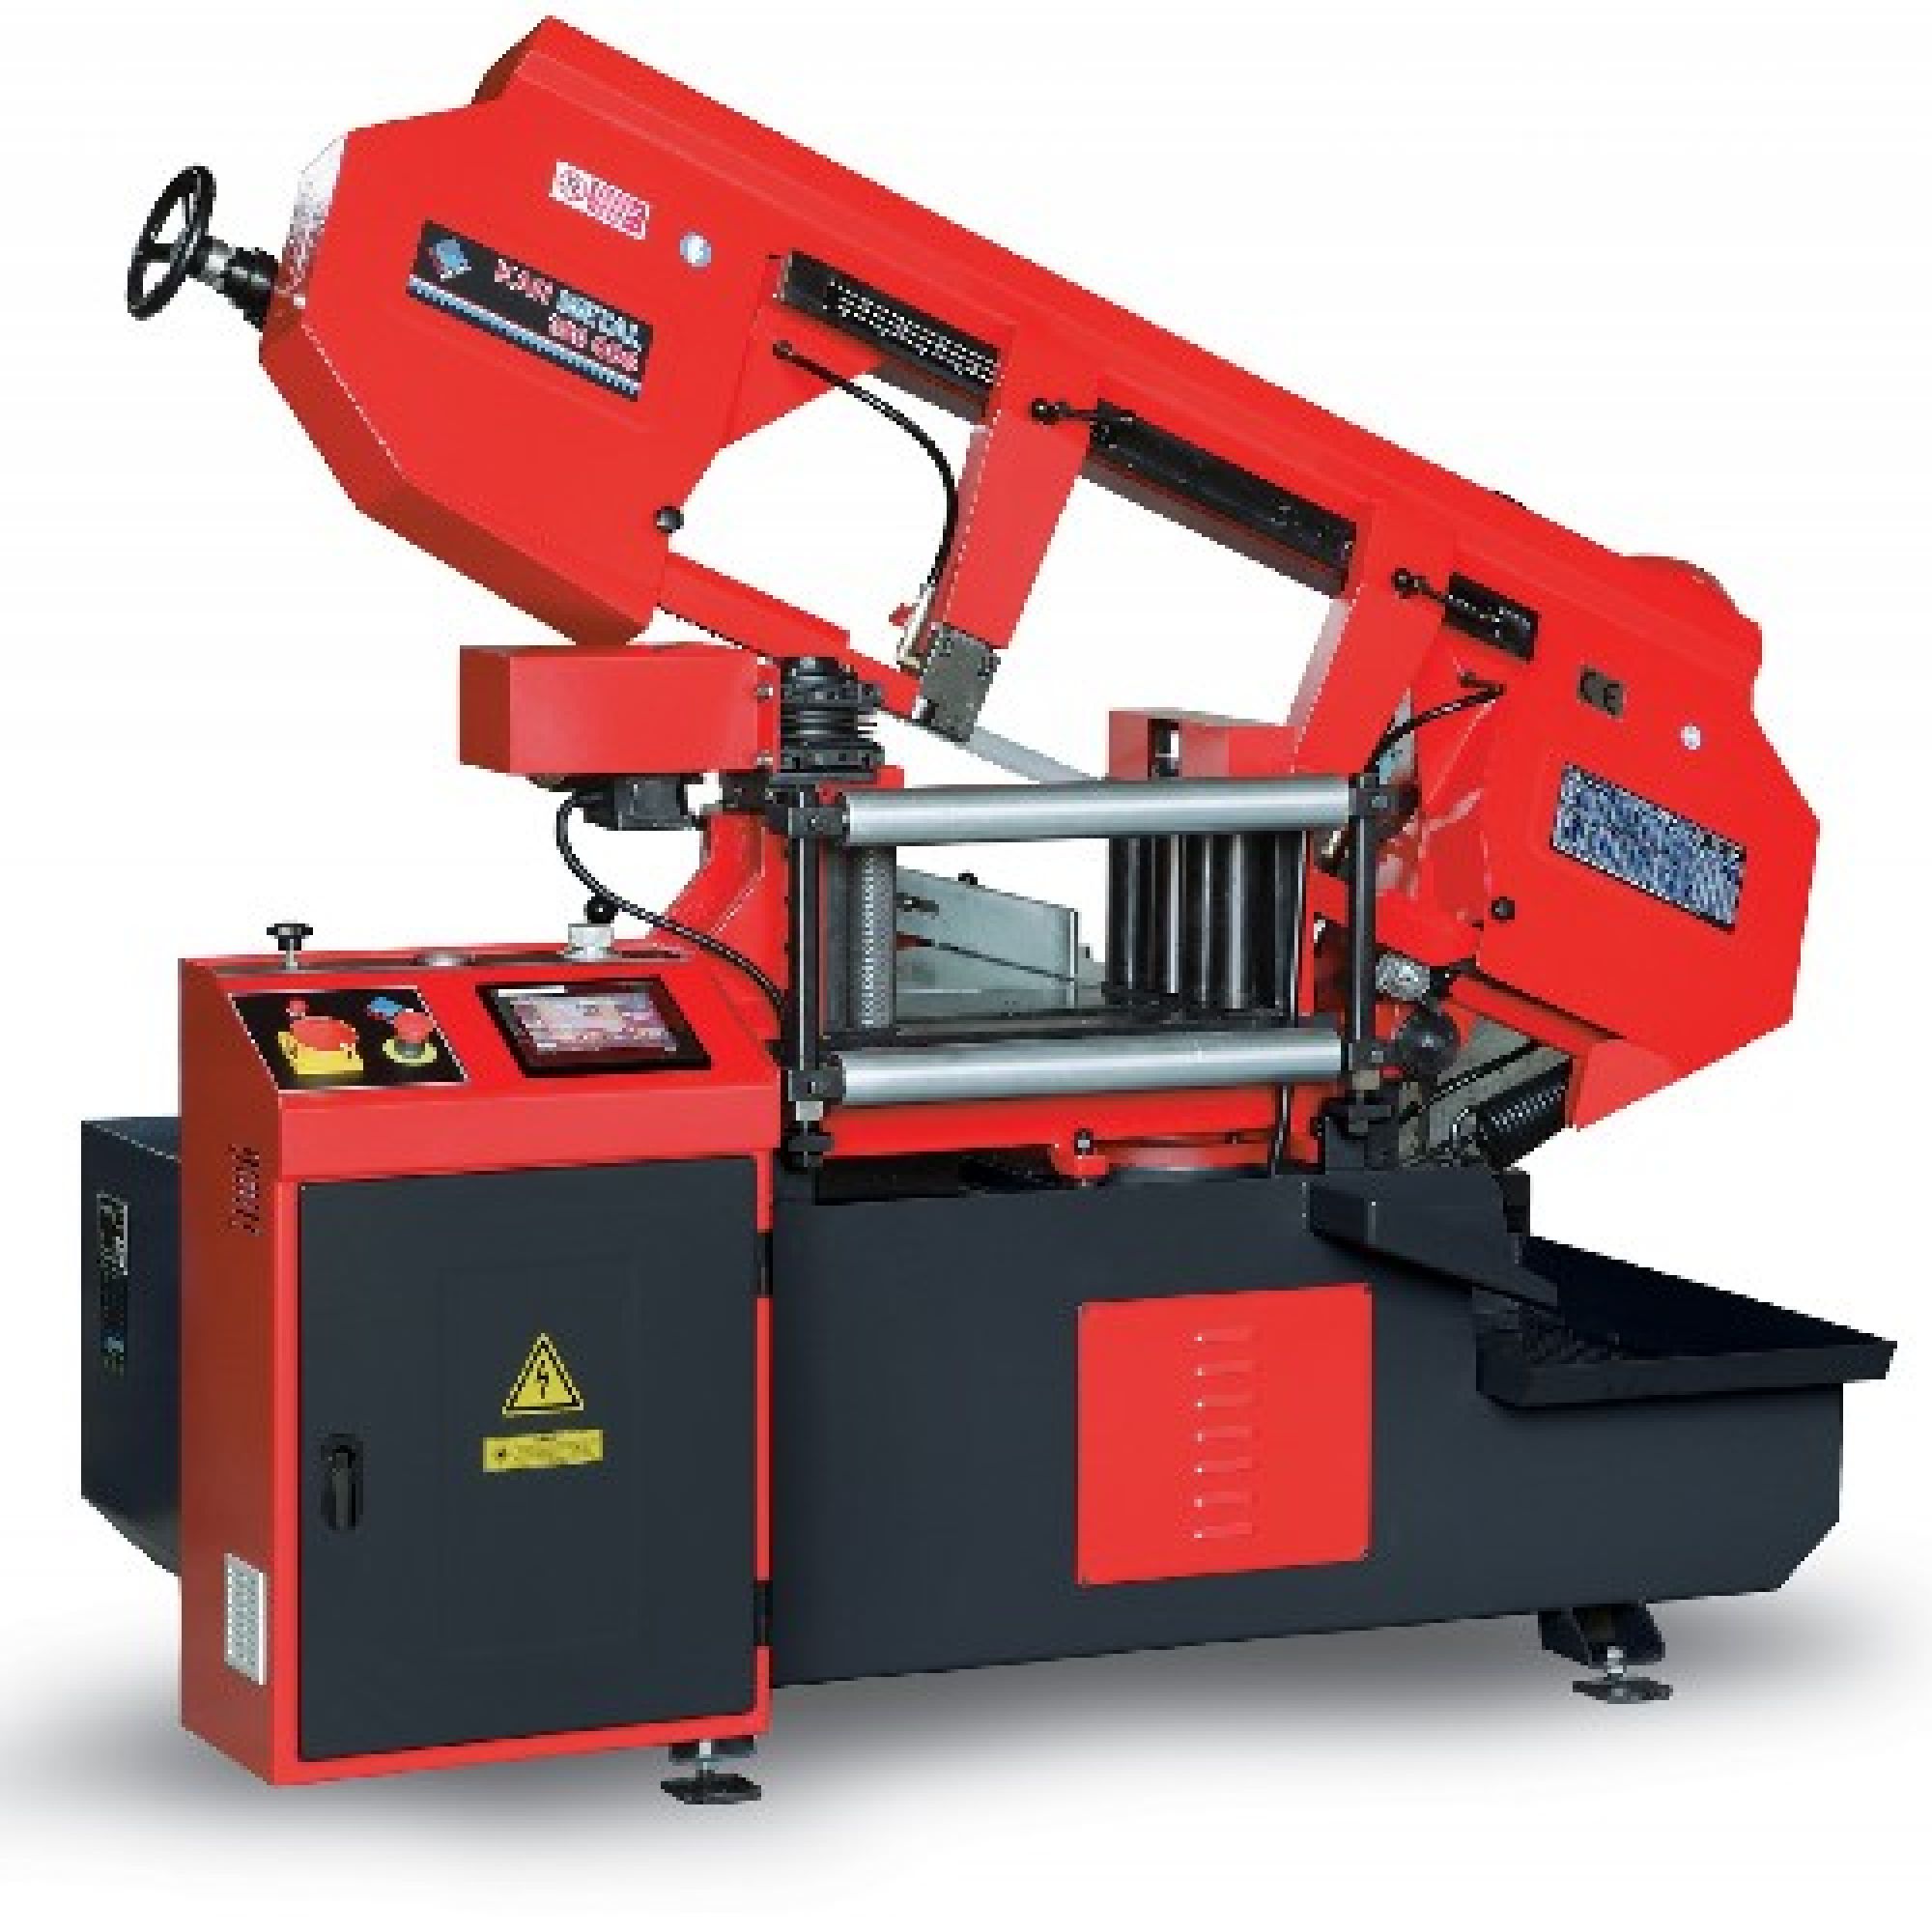 SD ODG 350x400 PLC Automatic Bandsaw